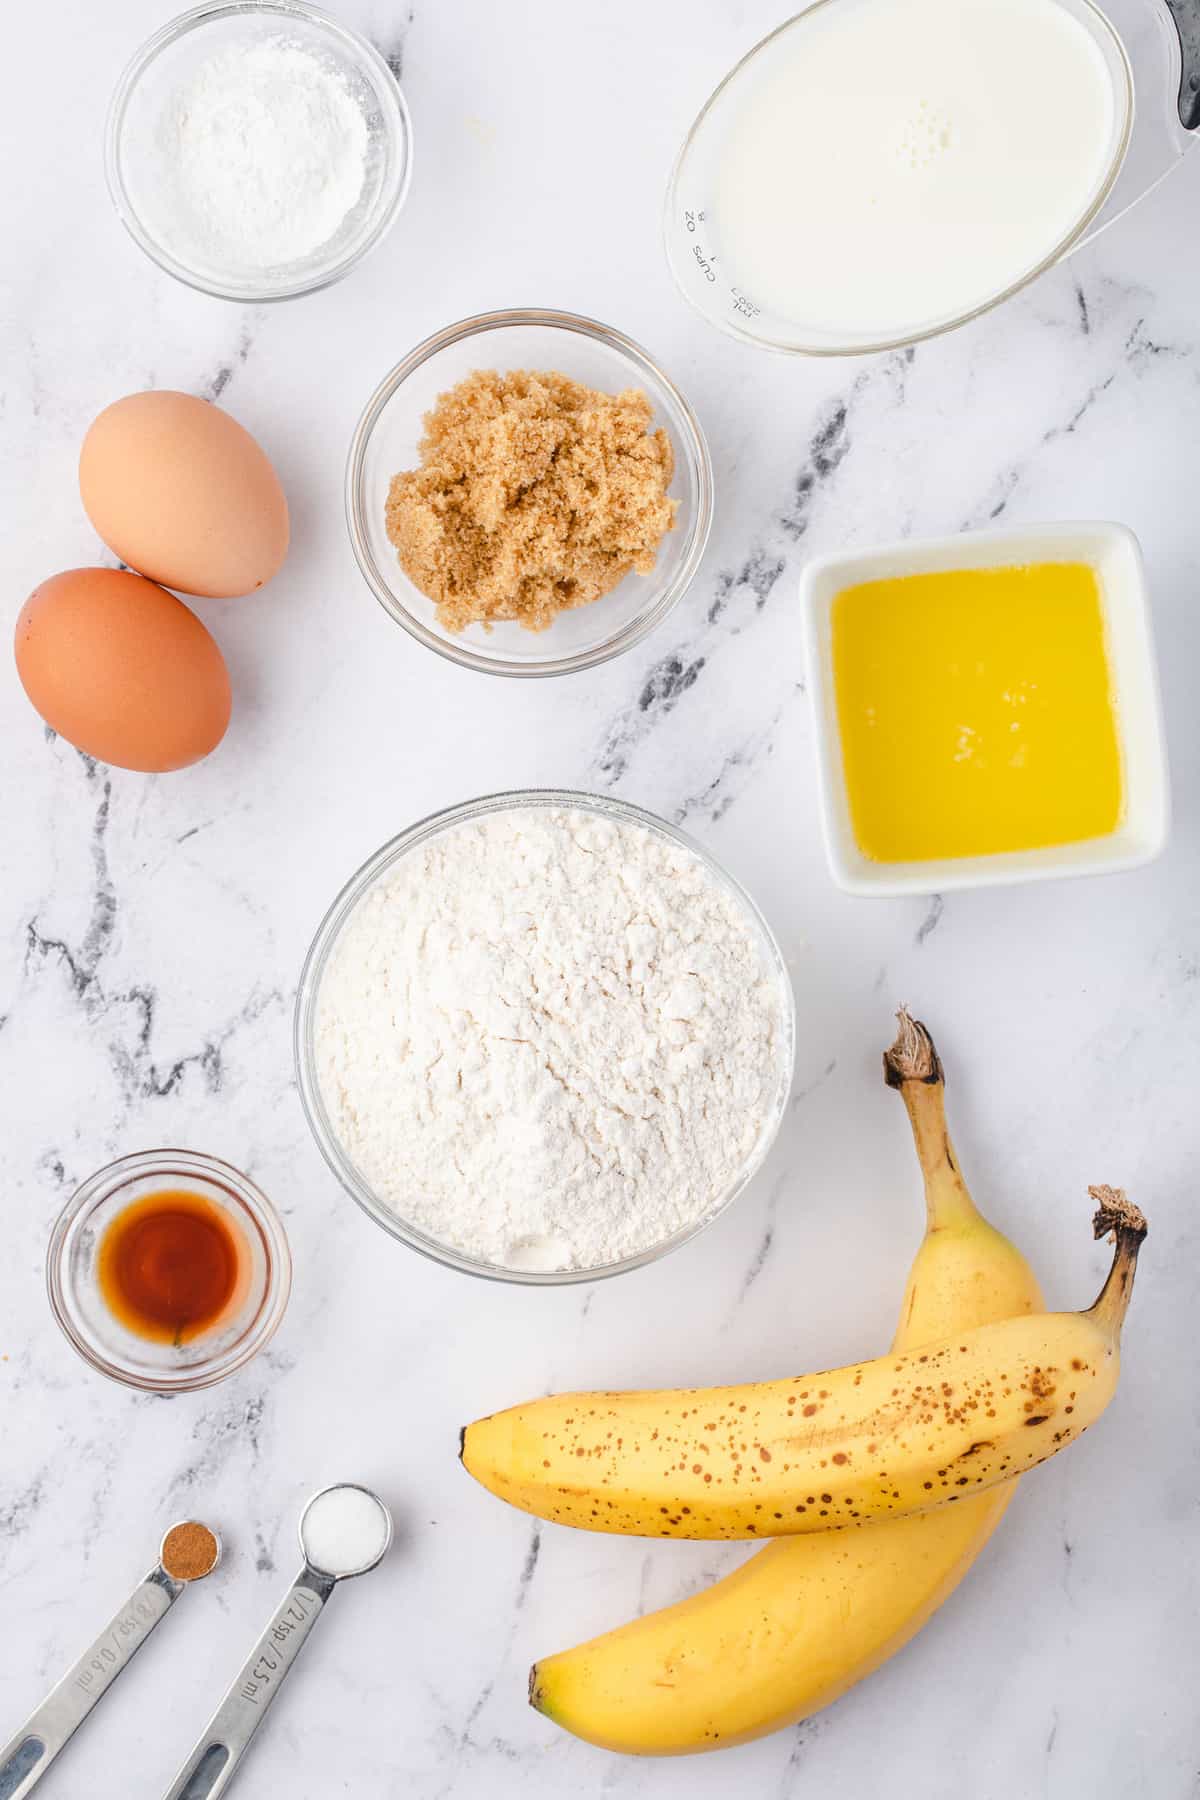 Ingredients needed for recipe including bananas.